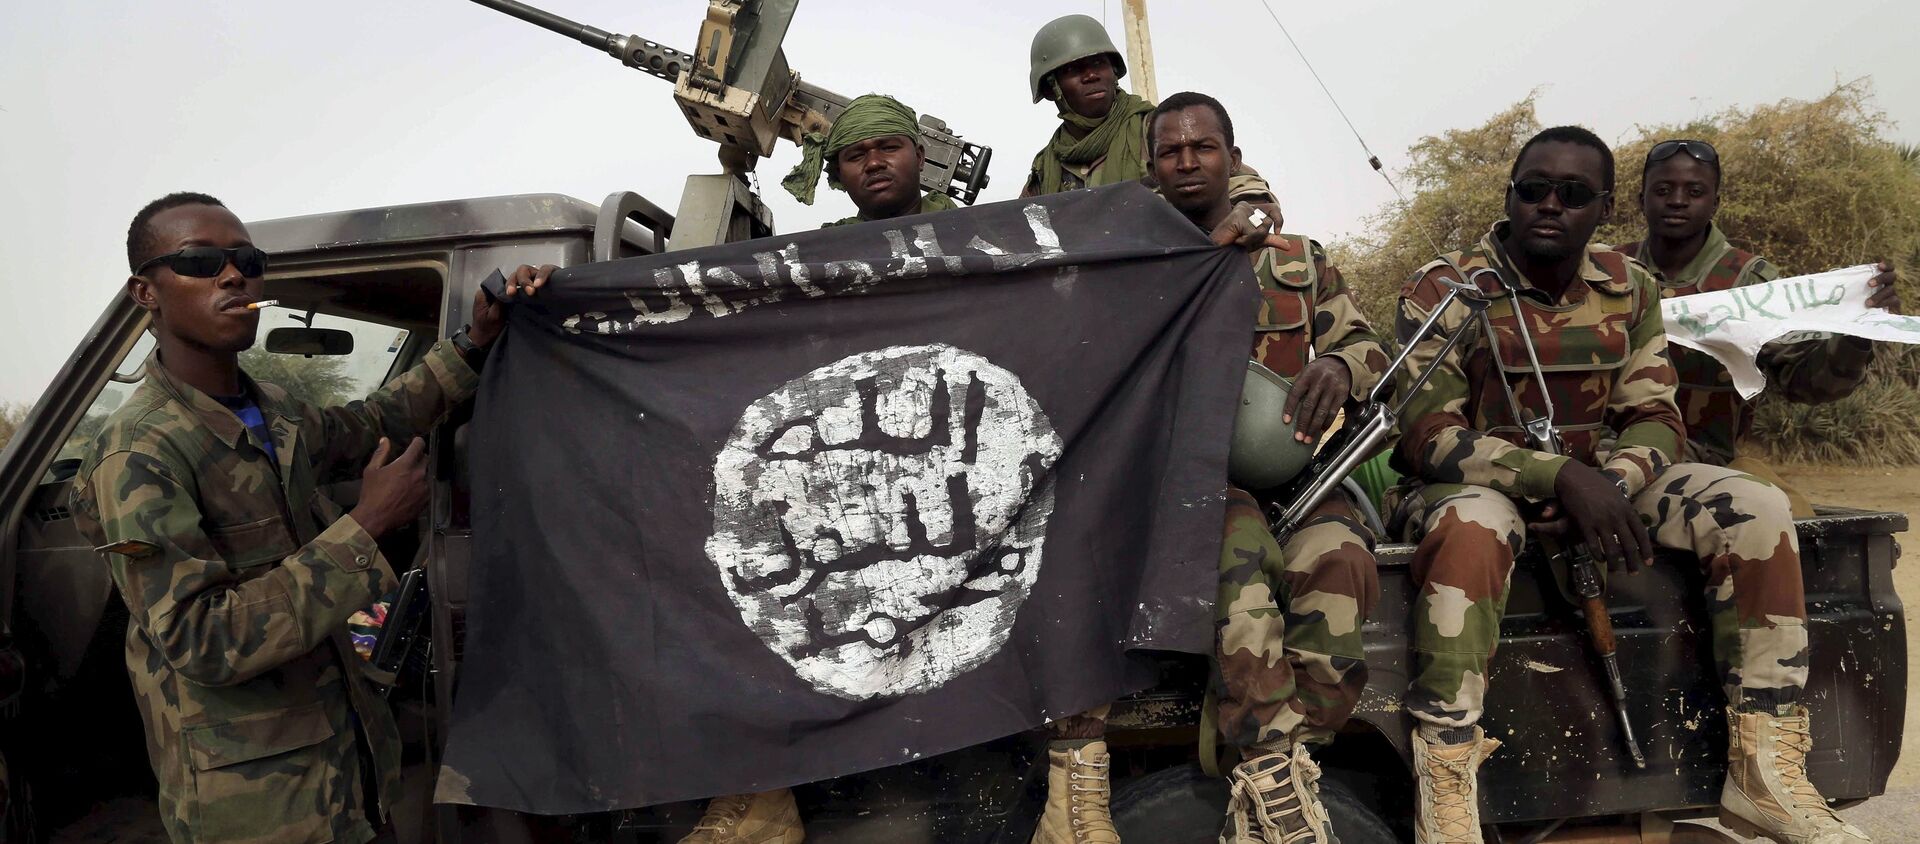 Nigerien soldiers hold up a Boko Haram flag that they had seized in the recently retaken town of Damasak, Nigeria, March 18, 2015 - Sputnik International, 1920, 24.07.2021